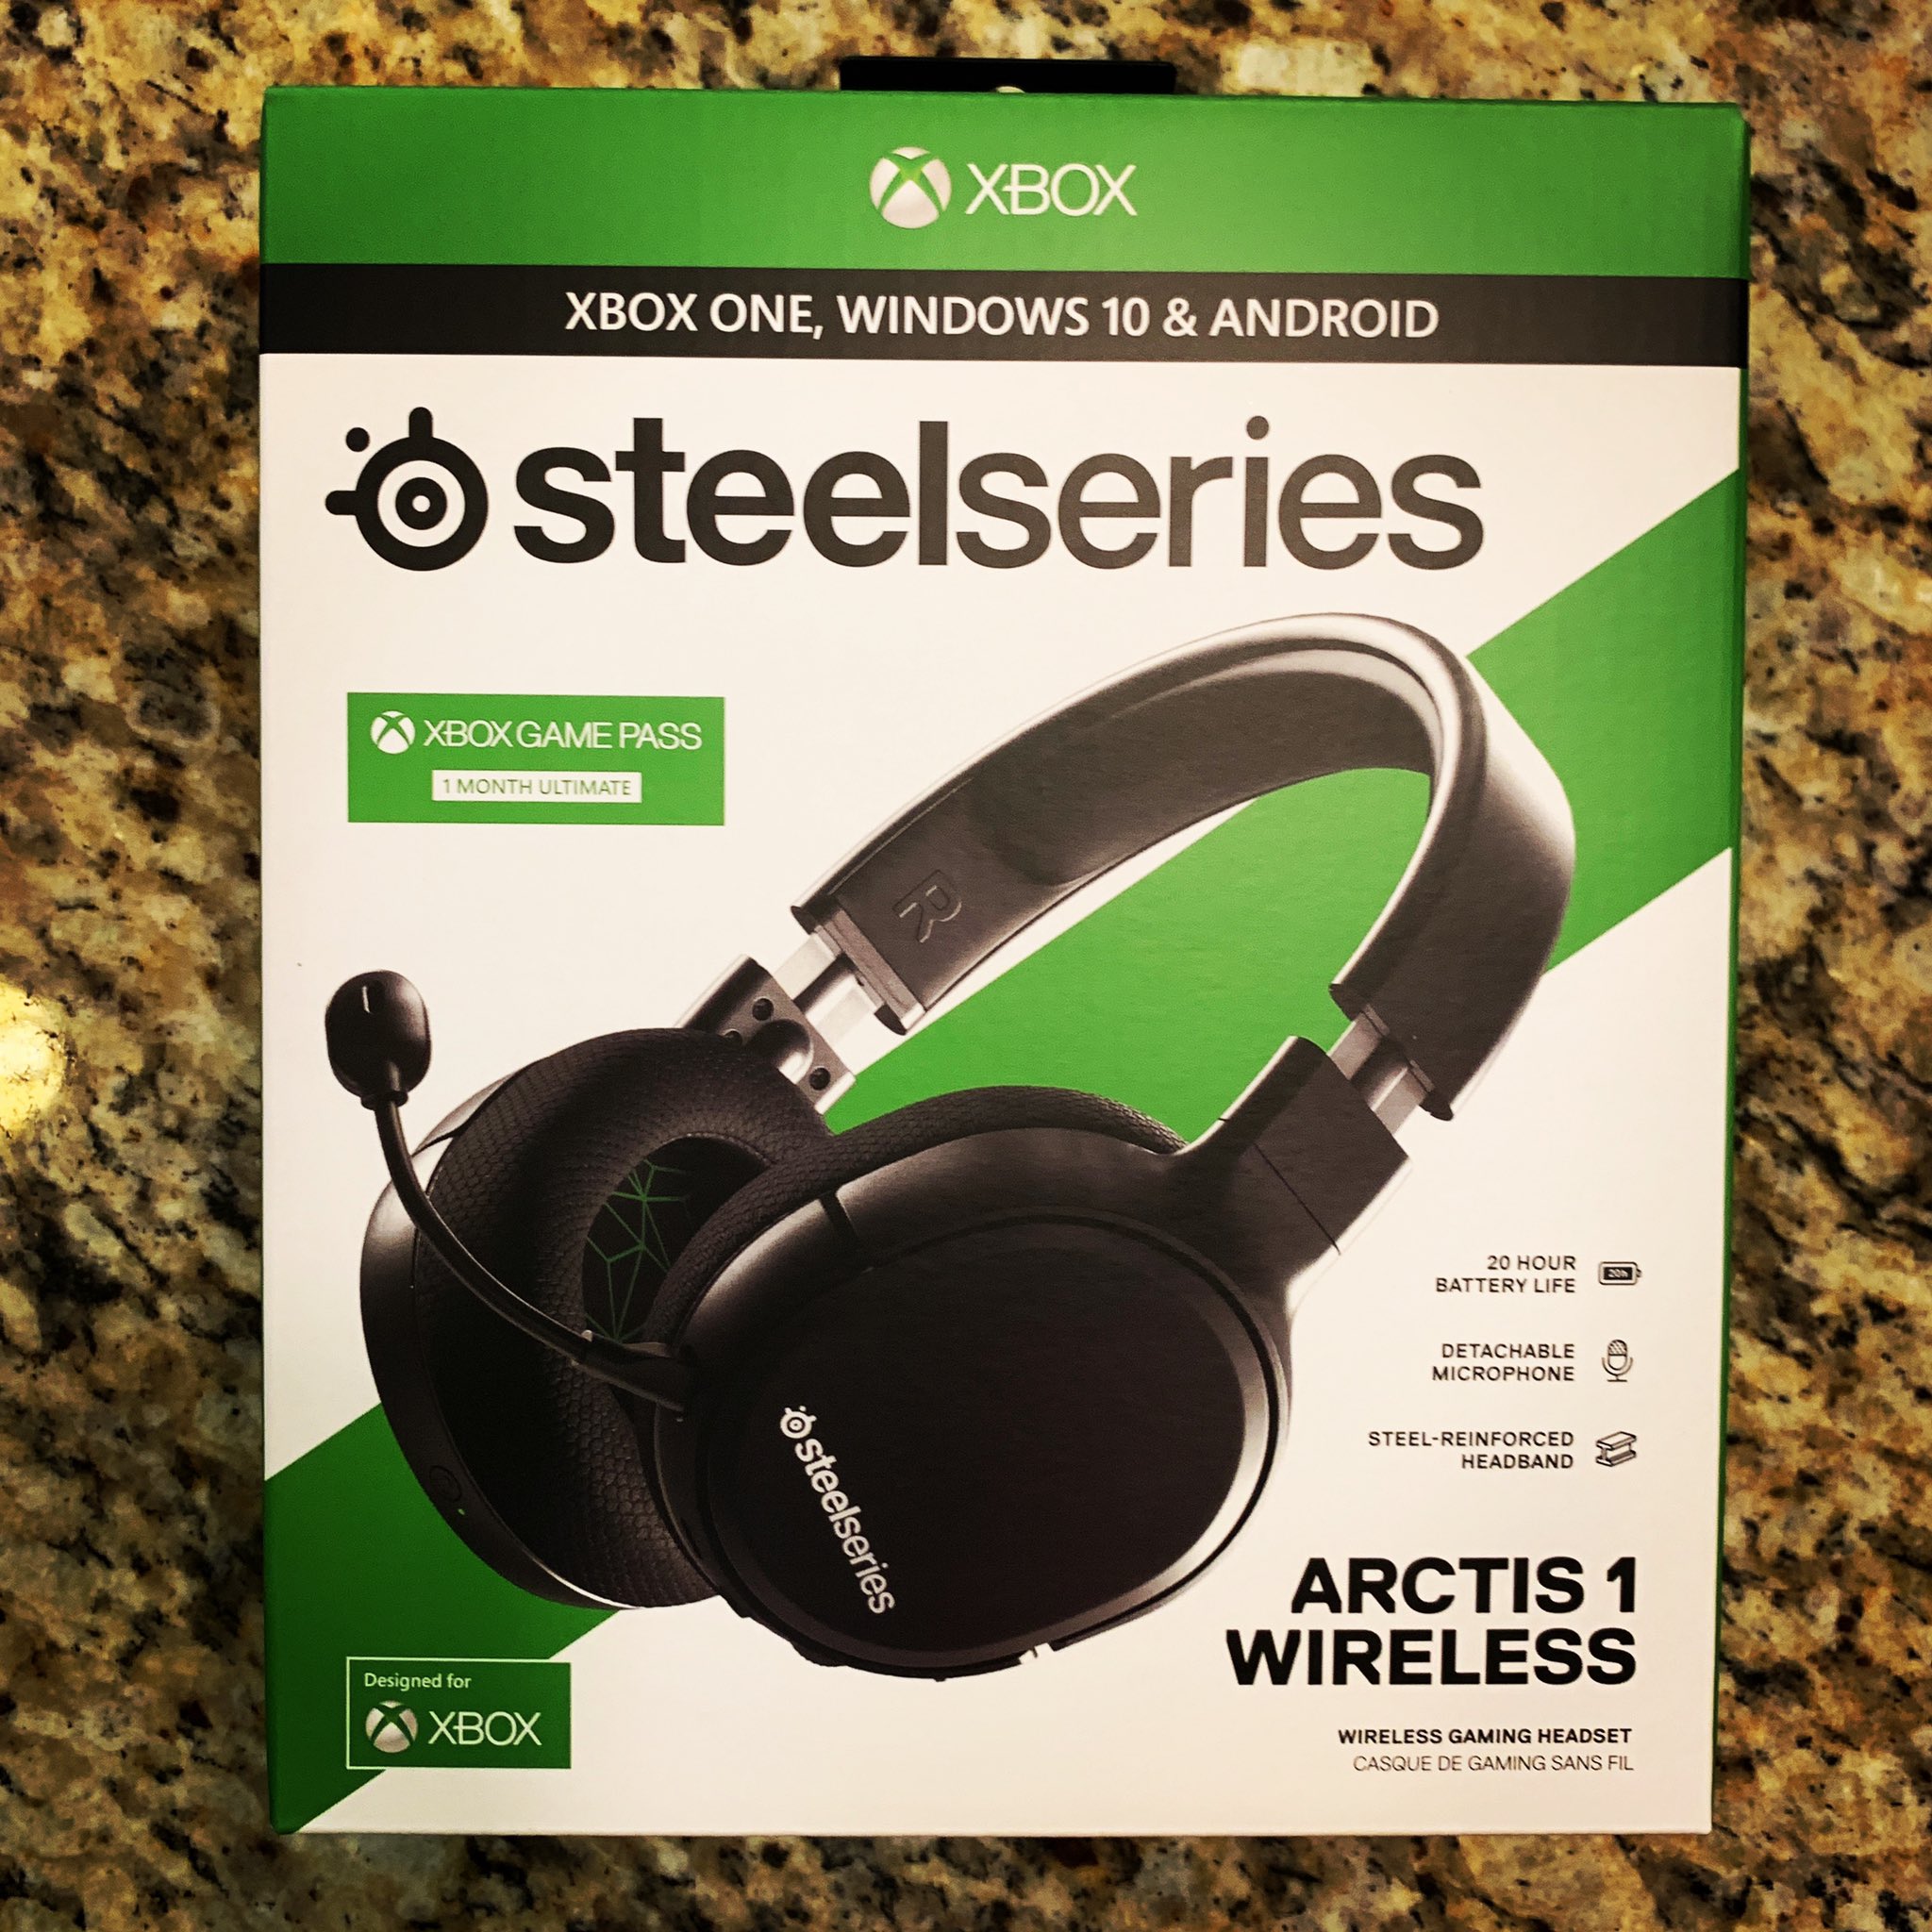 Sporten park Miniatuur Parris on Twitter: "a huge thank you to @steelseries for the Arctis 1  Wireless headset for Xbox One and Windows 10 😊 https://t.co/YqjyXSk7po" /  Twitter